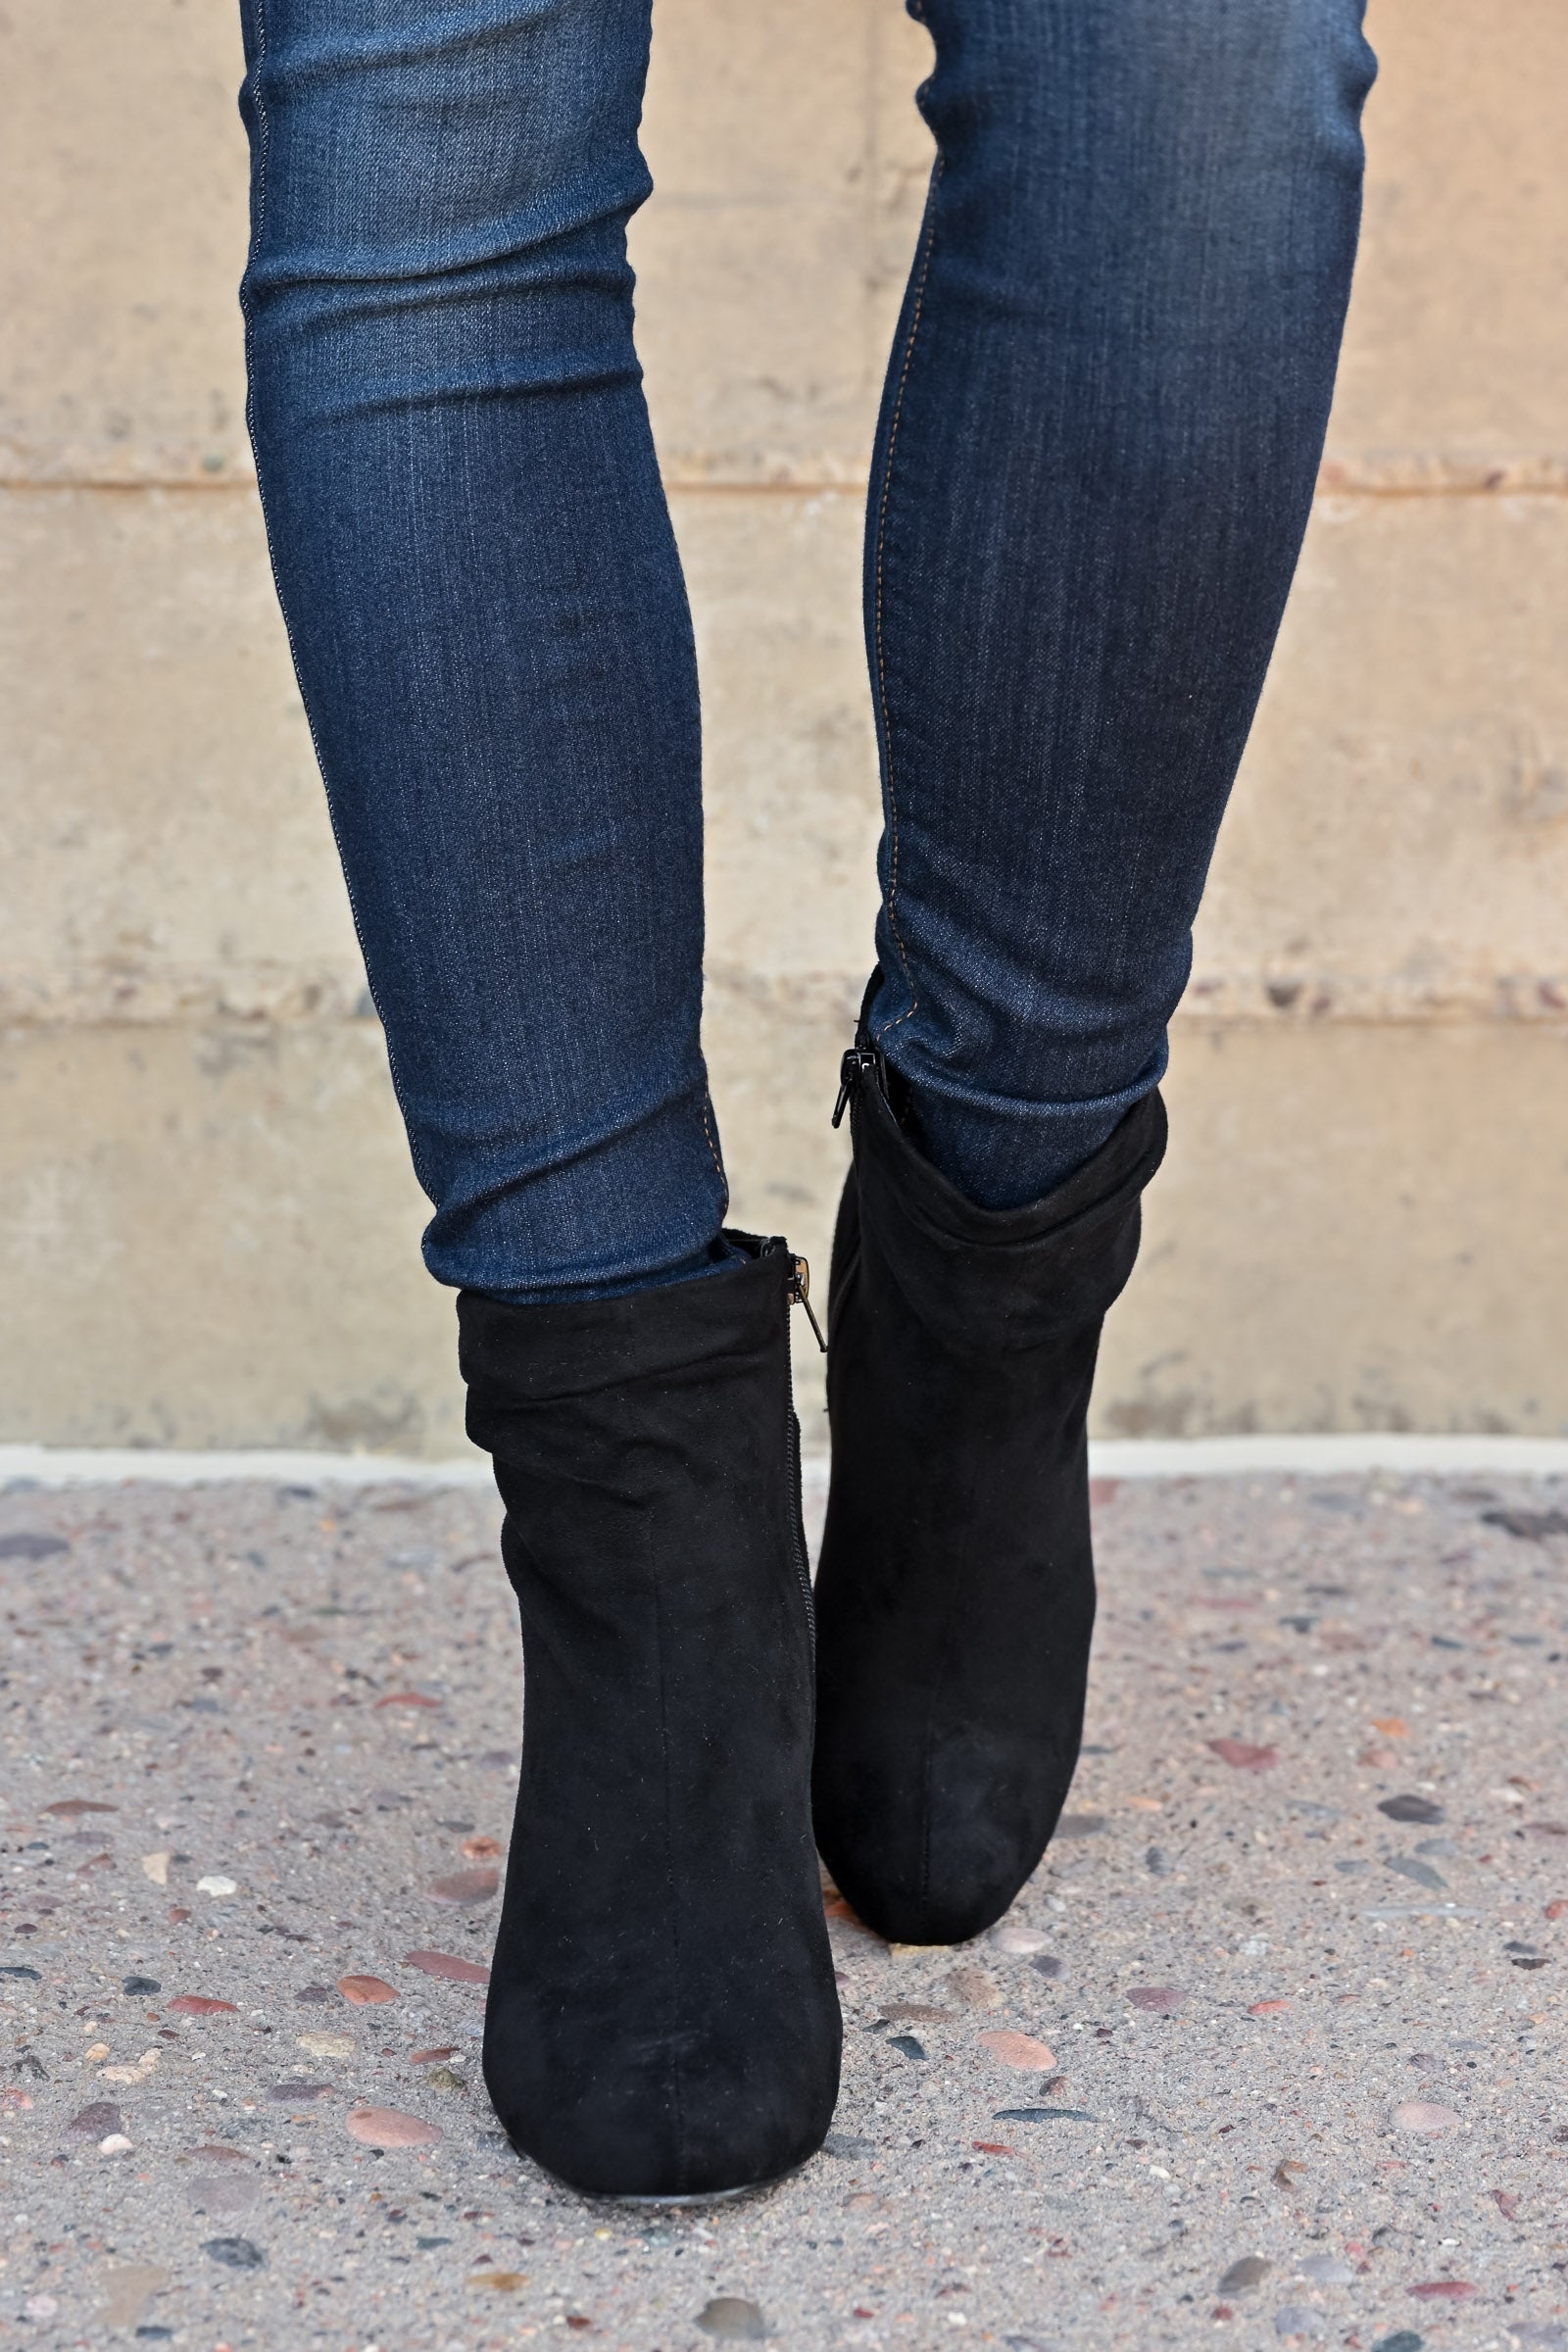 slouchy booties